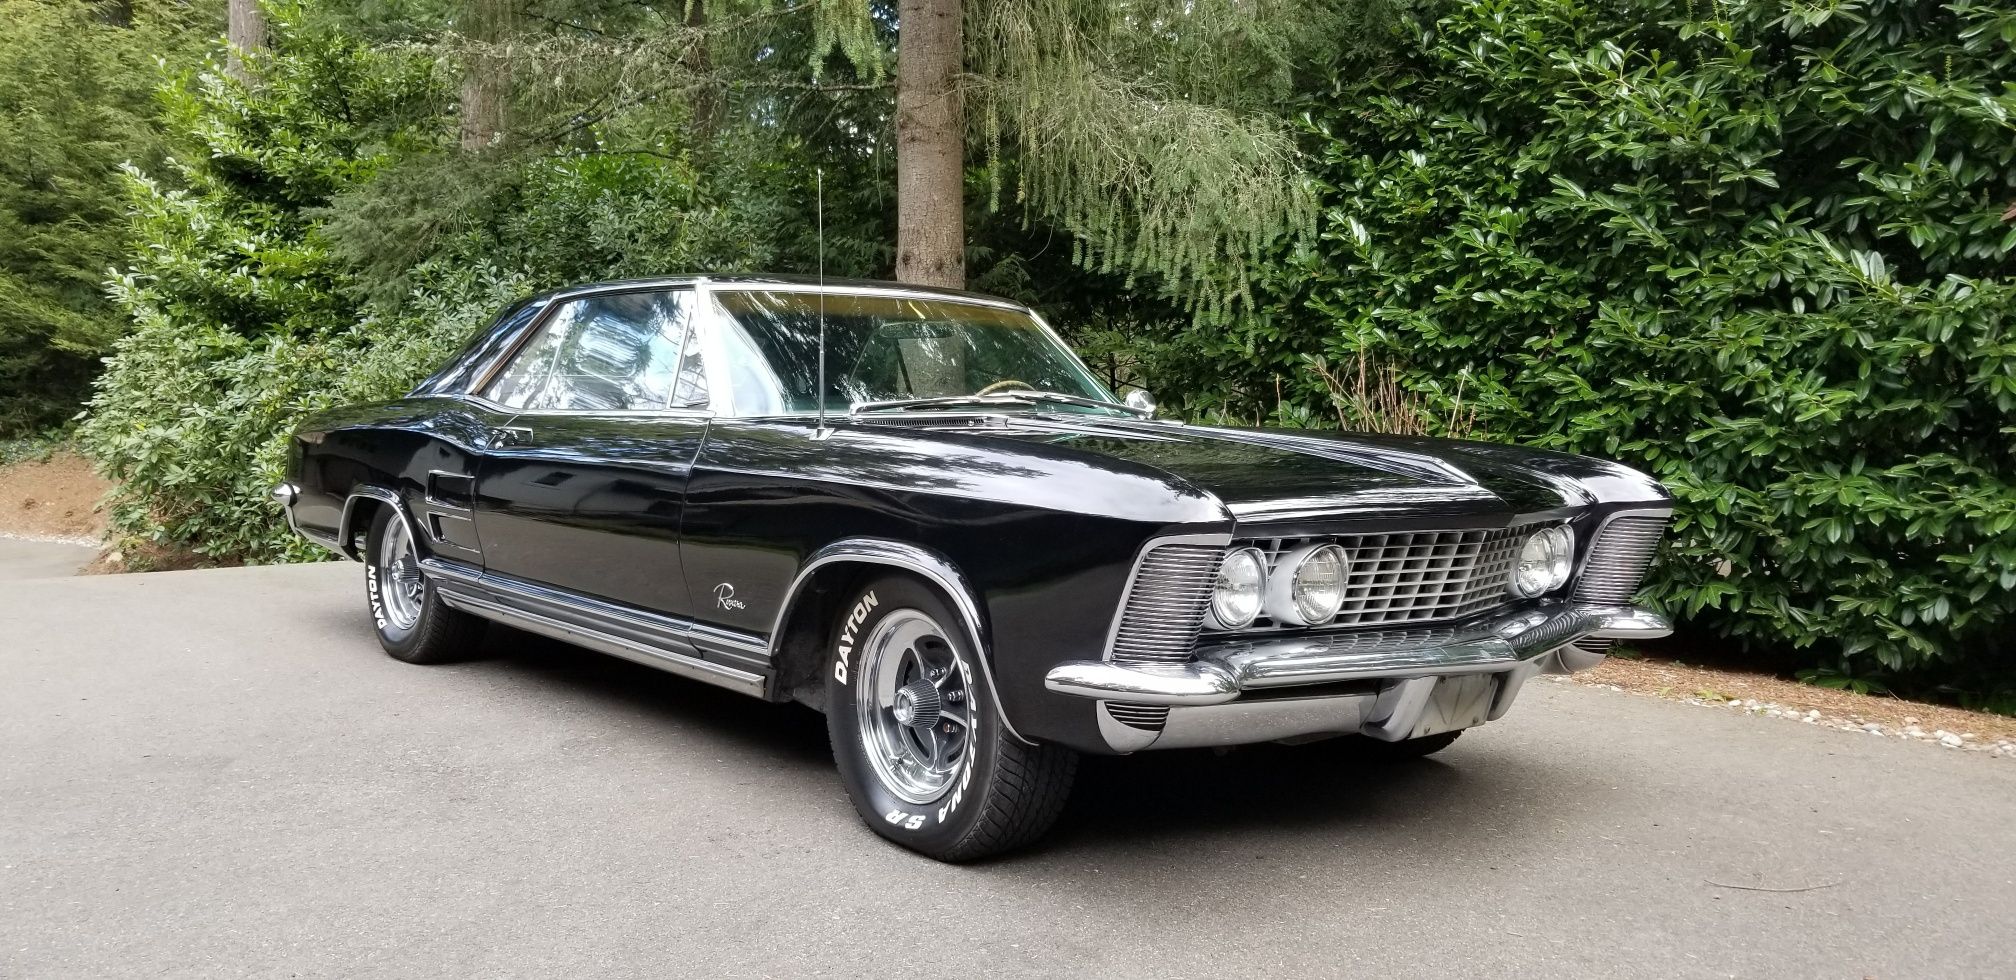 A black 1963 Buick Riviera is viewed from the front passenger side.